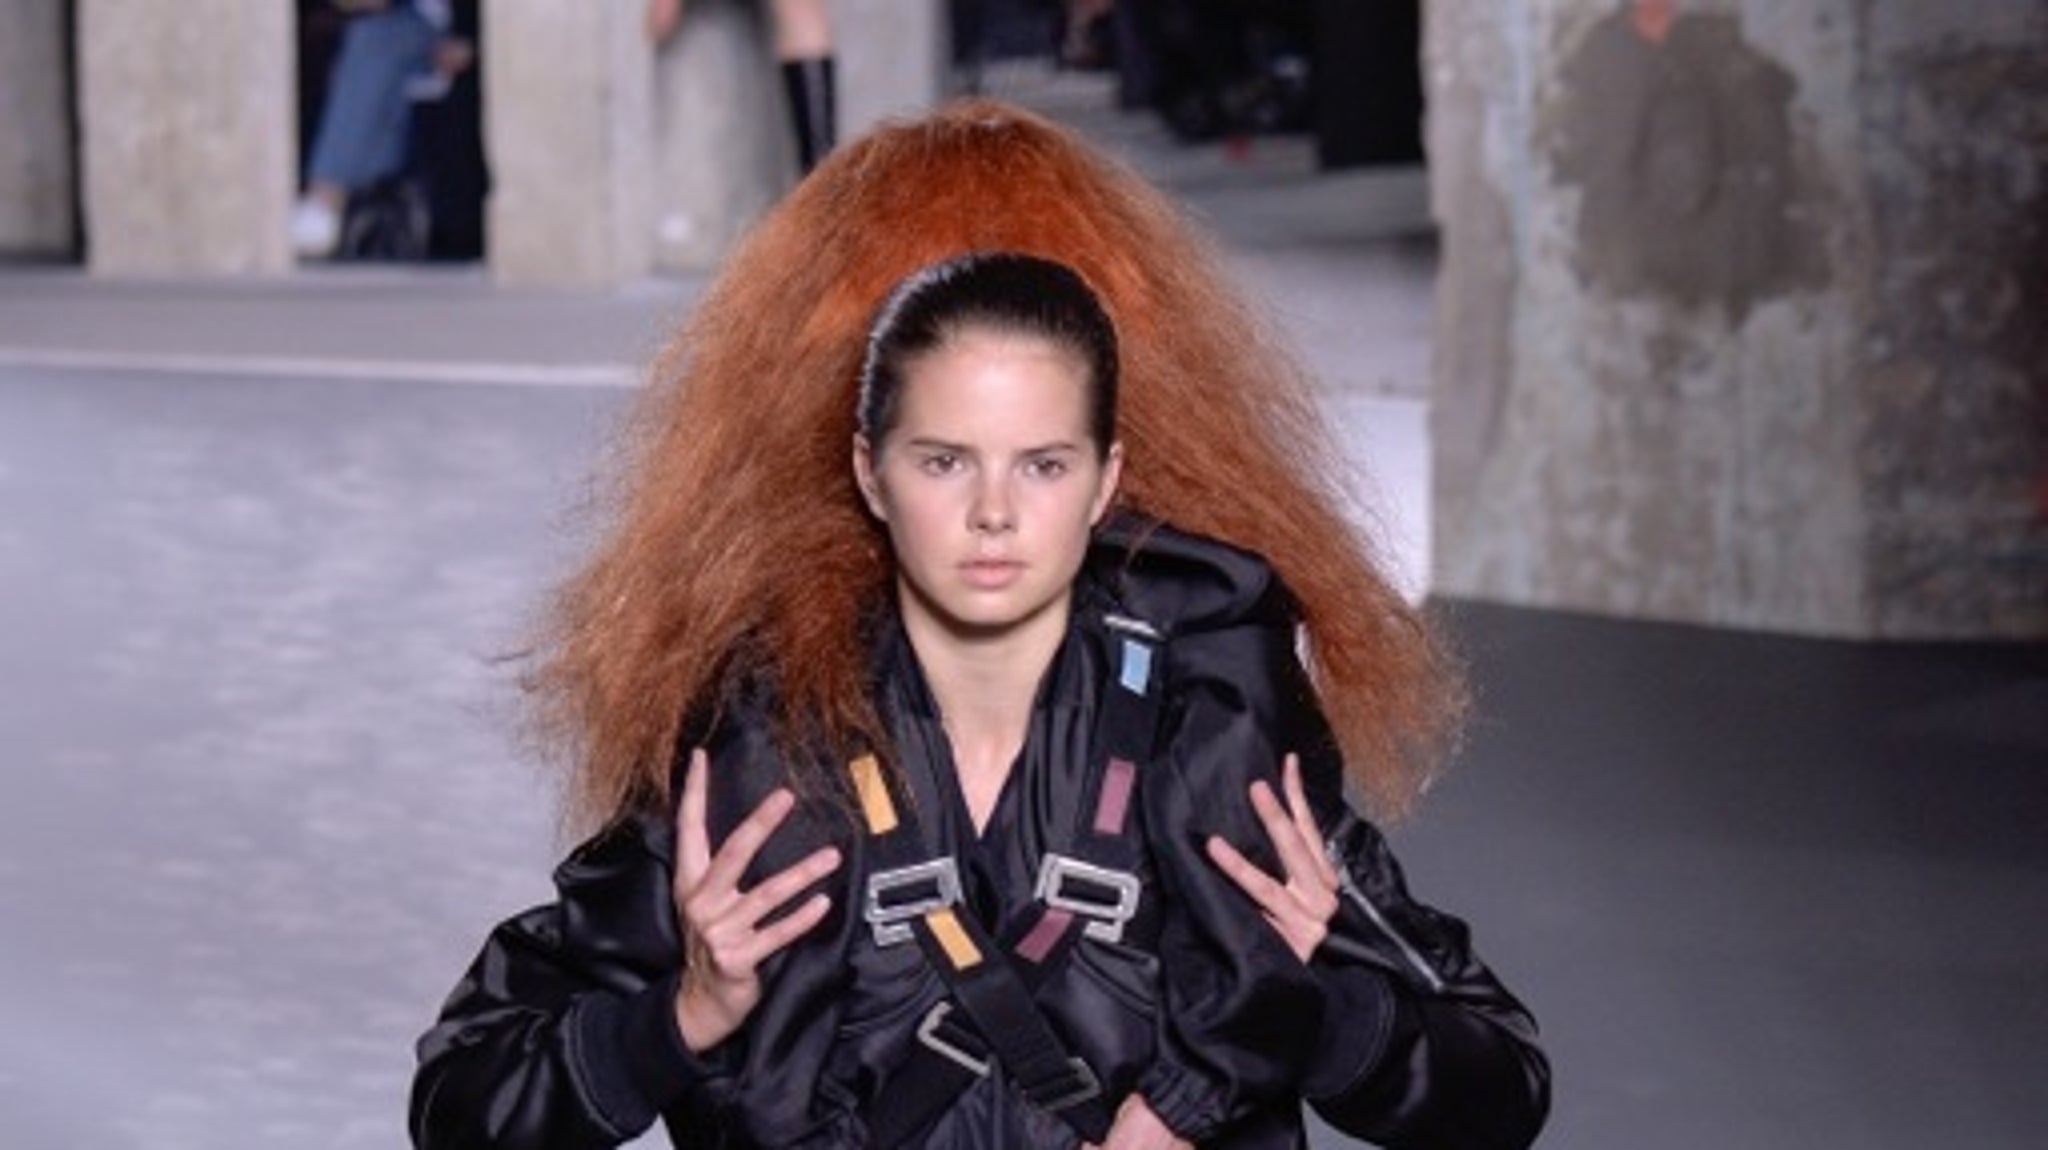 Paris Fashion Week's WTF Moment -- The Ridiculous New Trend